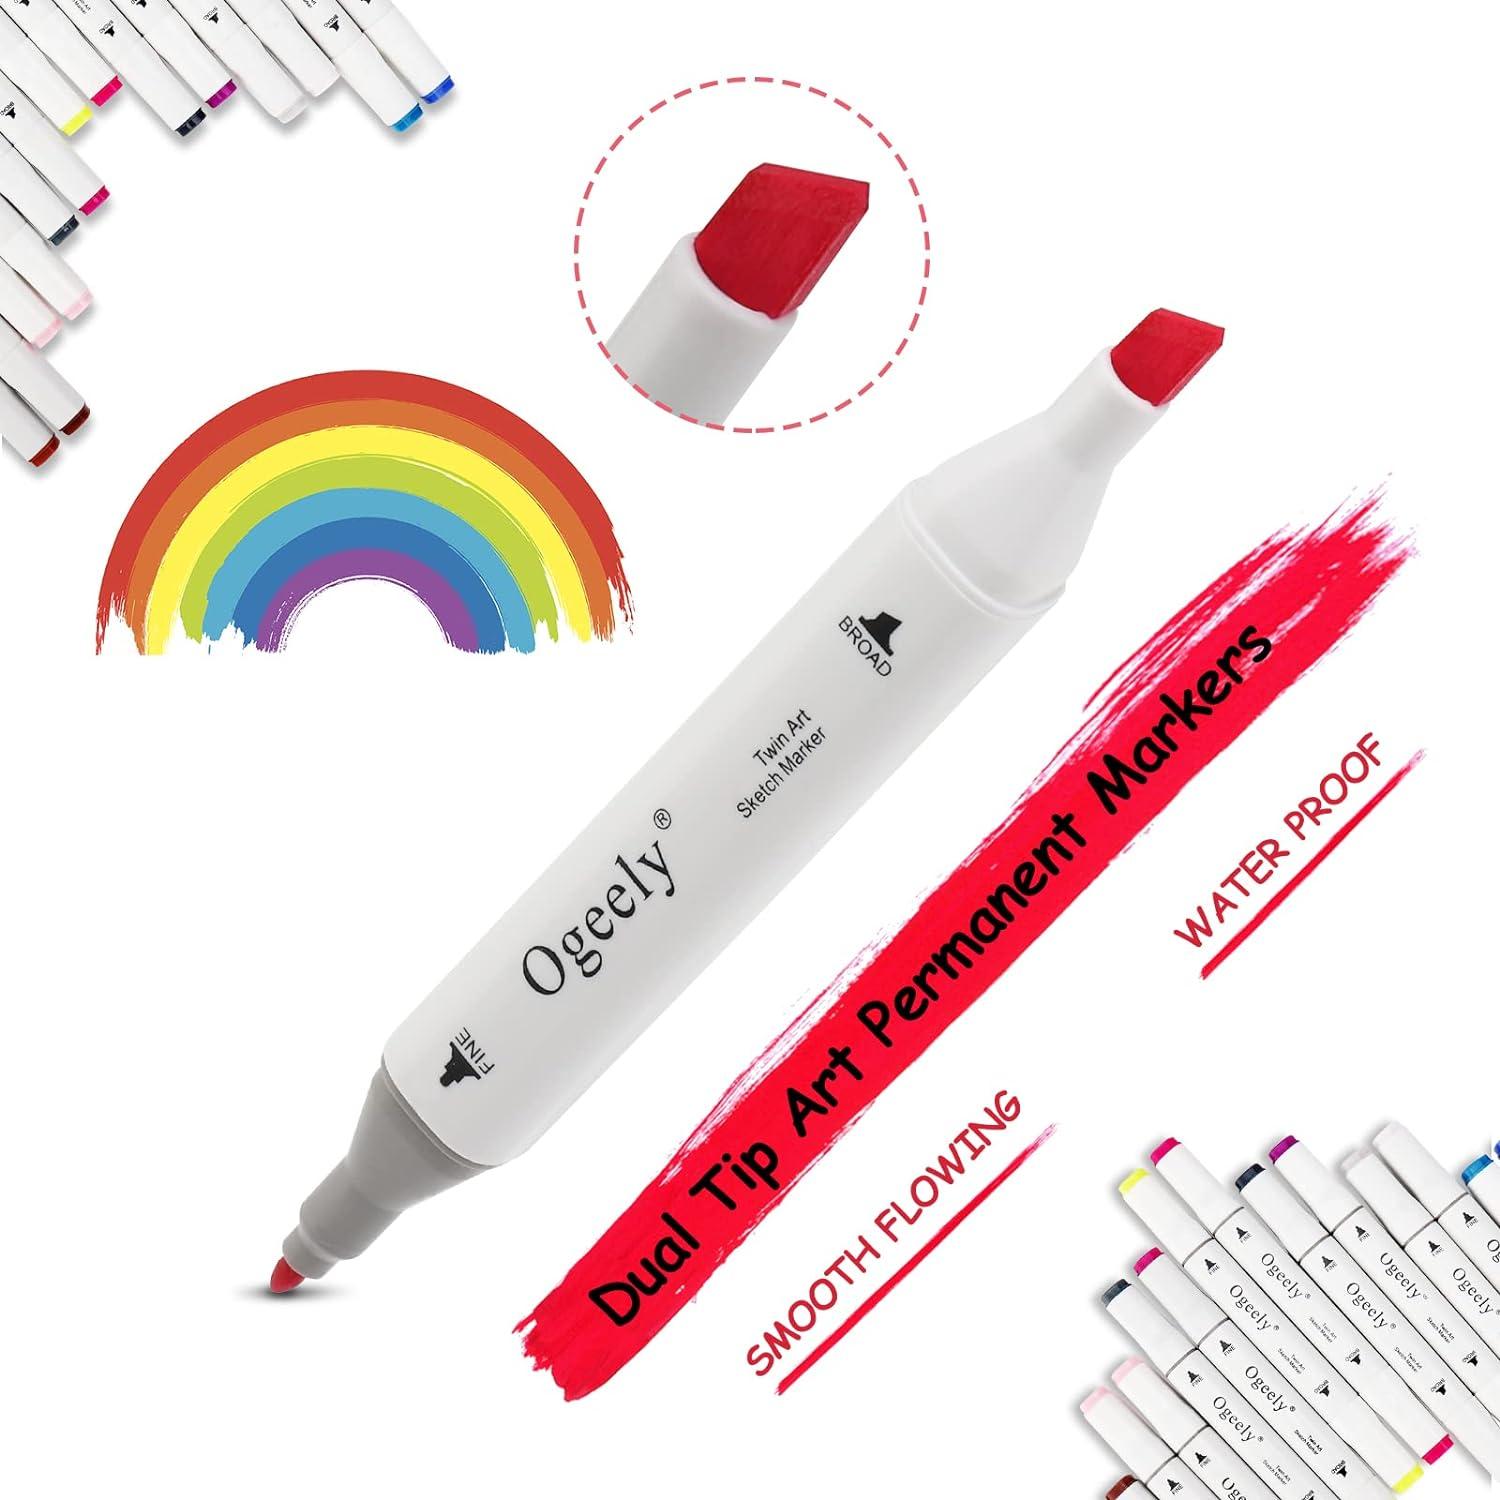 80 Colour Alcohol Based Art Markers, Permanent Art Marker Set in Two Colours, Suitable for Children and Adults for Drawing, Illustration, Sketching